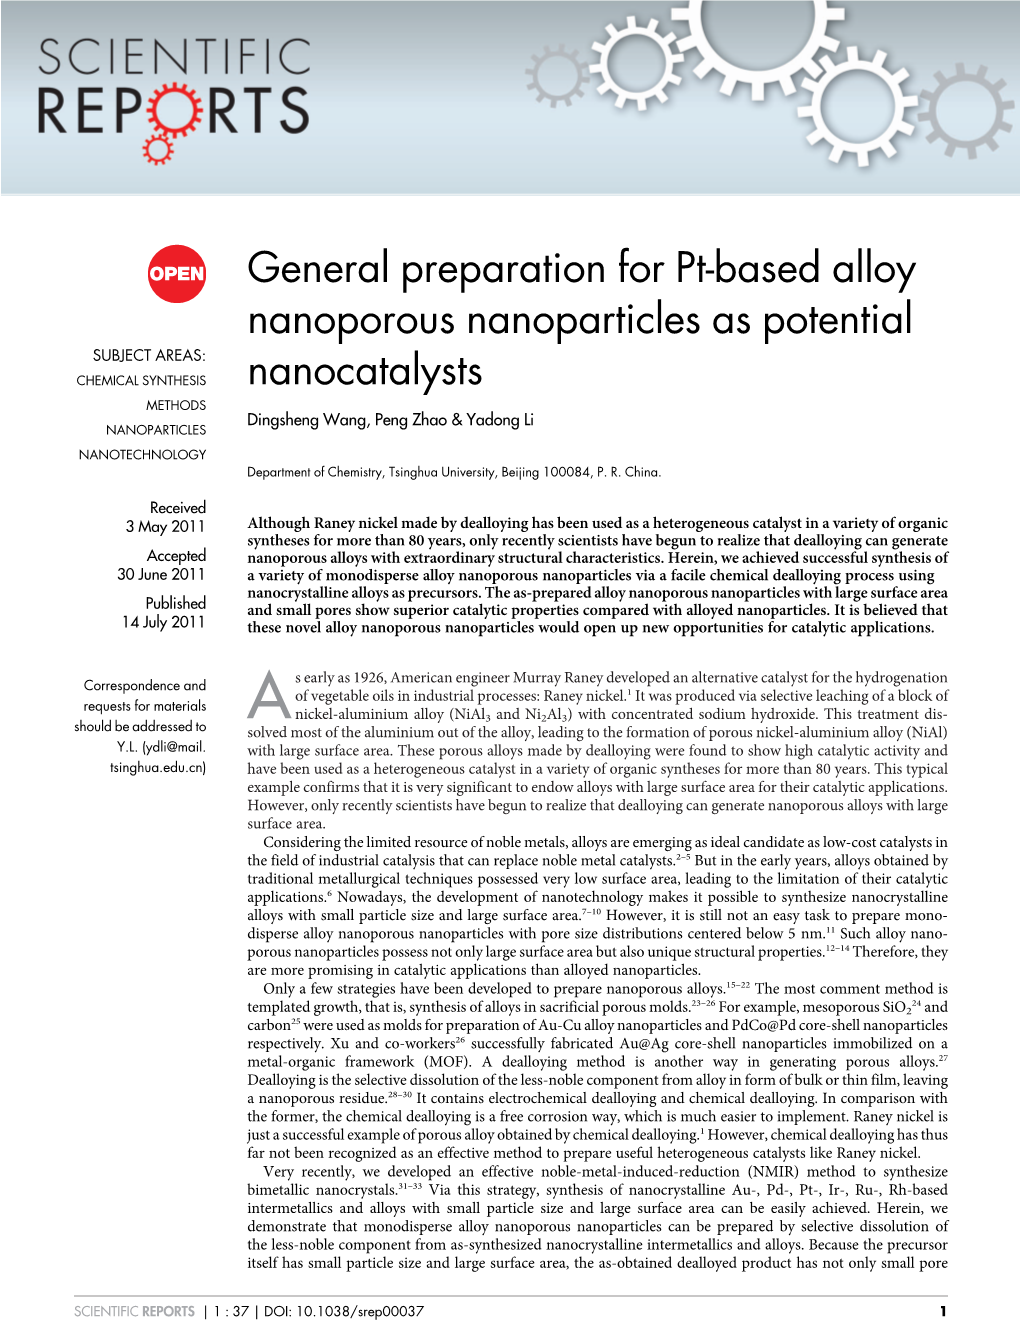 General Preparation for Pt-Based Alloy Nanoporous Nanoparticles As Potential Nanocatalysts